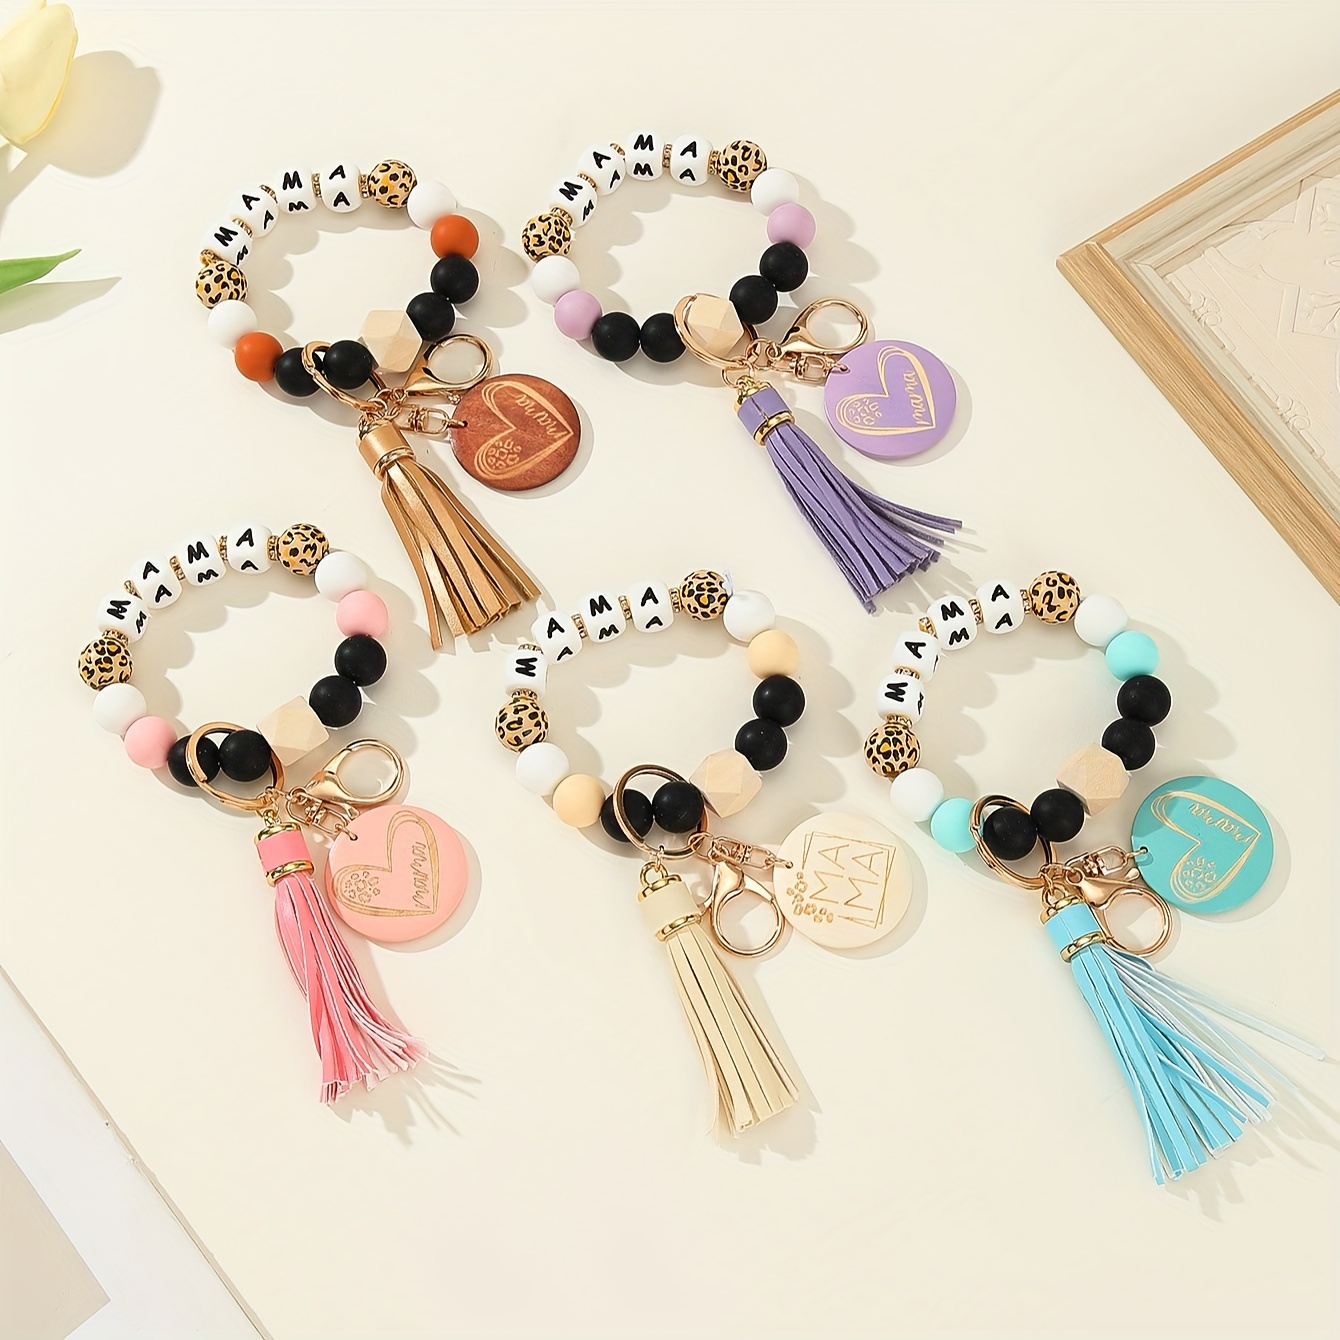 

Chic 'mama' Wooden Bead Bracelet Keychain With Tassel - Silicone, Round Letter Charm For Women - Perfect Mother's Day Gift